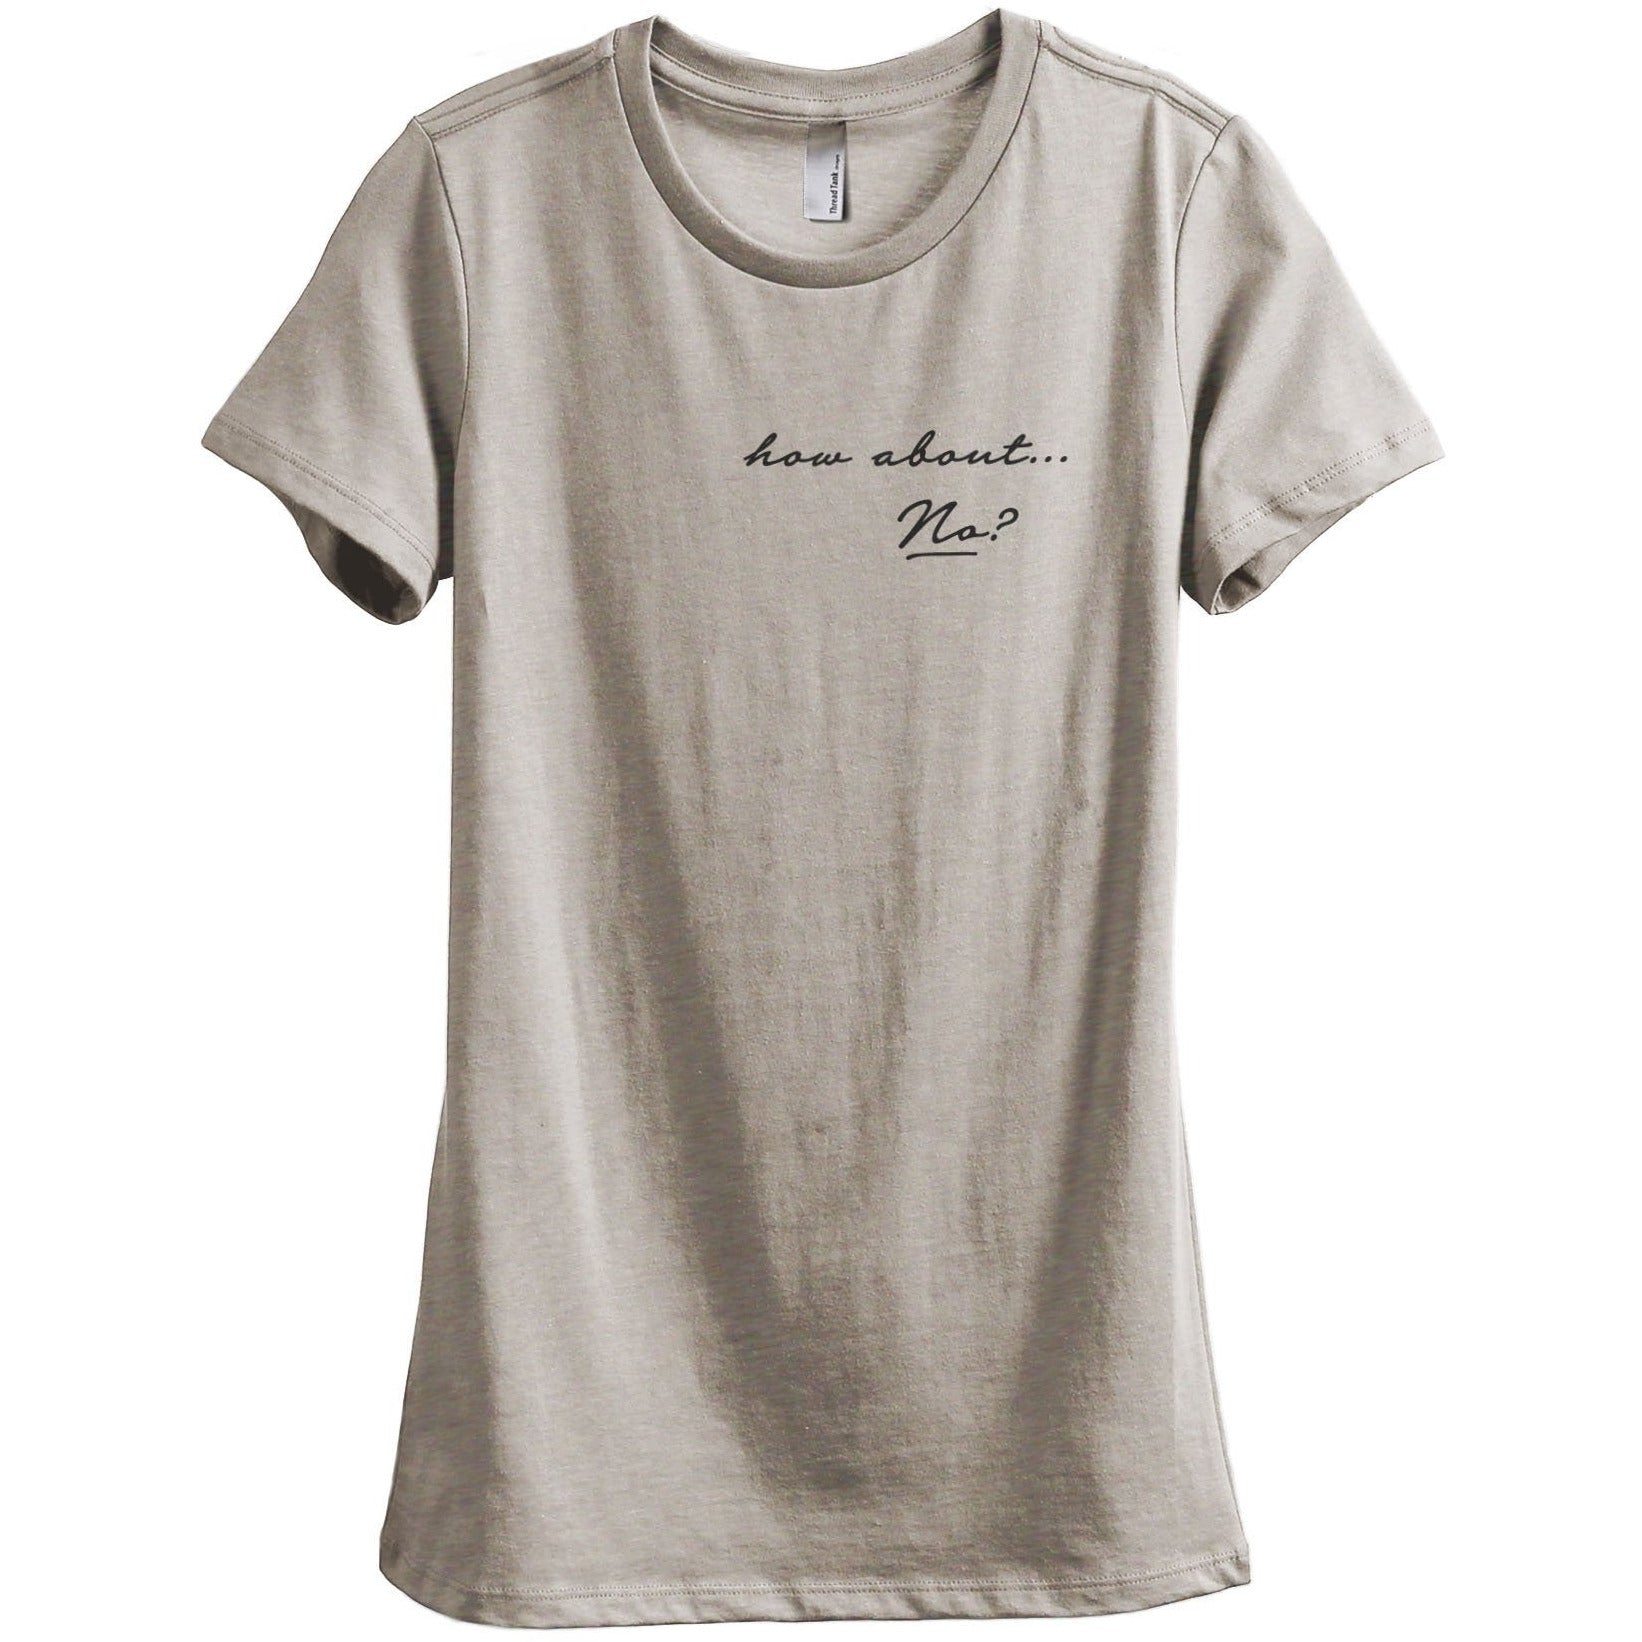 How About No Women's Relaxed Crewneck T-Shirt Top Tee Heather Tan